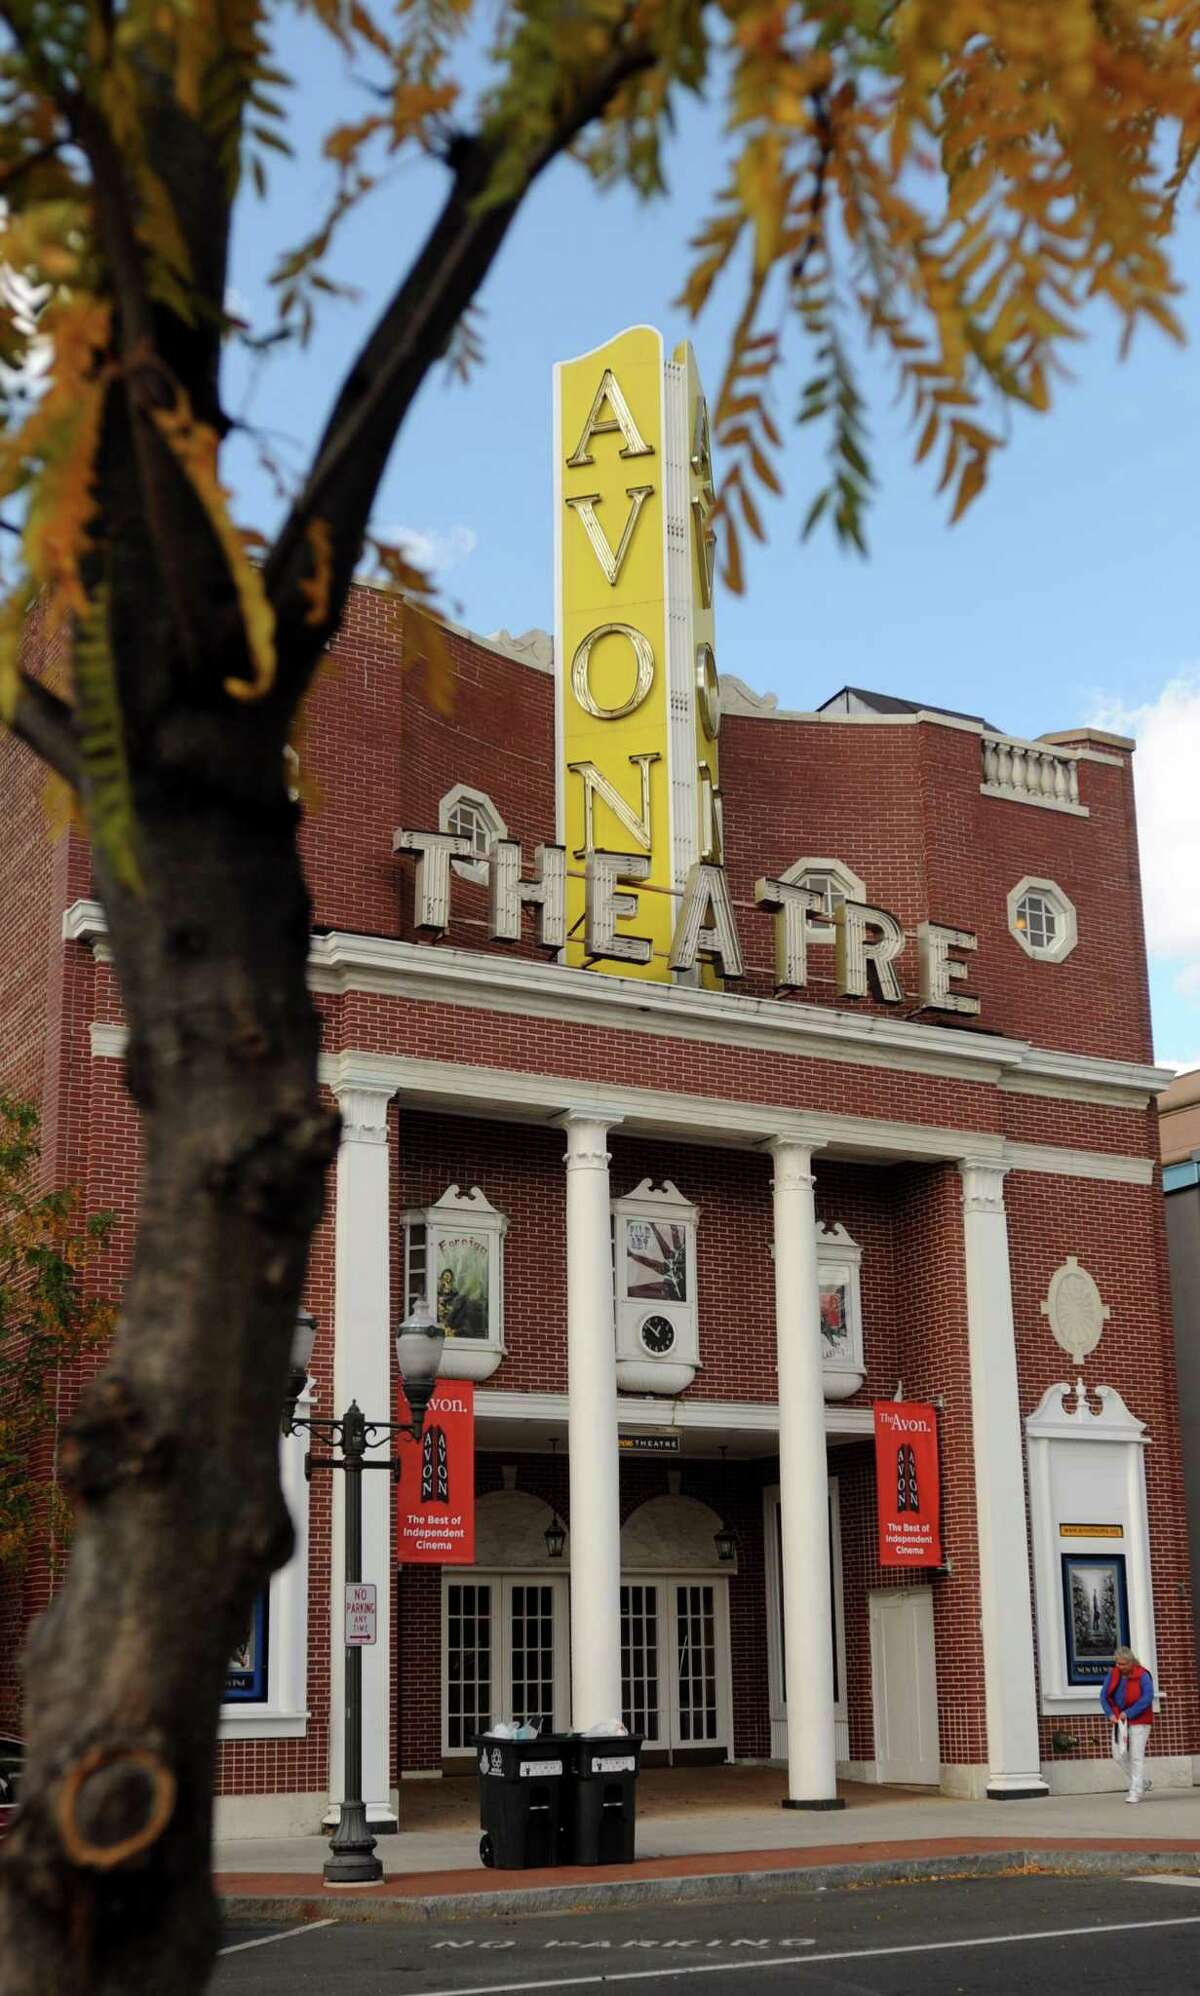 The Avon Theater on Bedford Street in Stamford, Conn. Friday, Oct. 16, 2015.